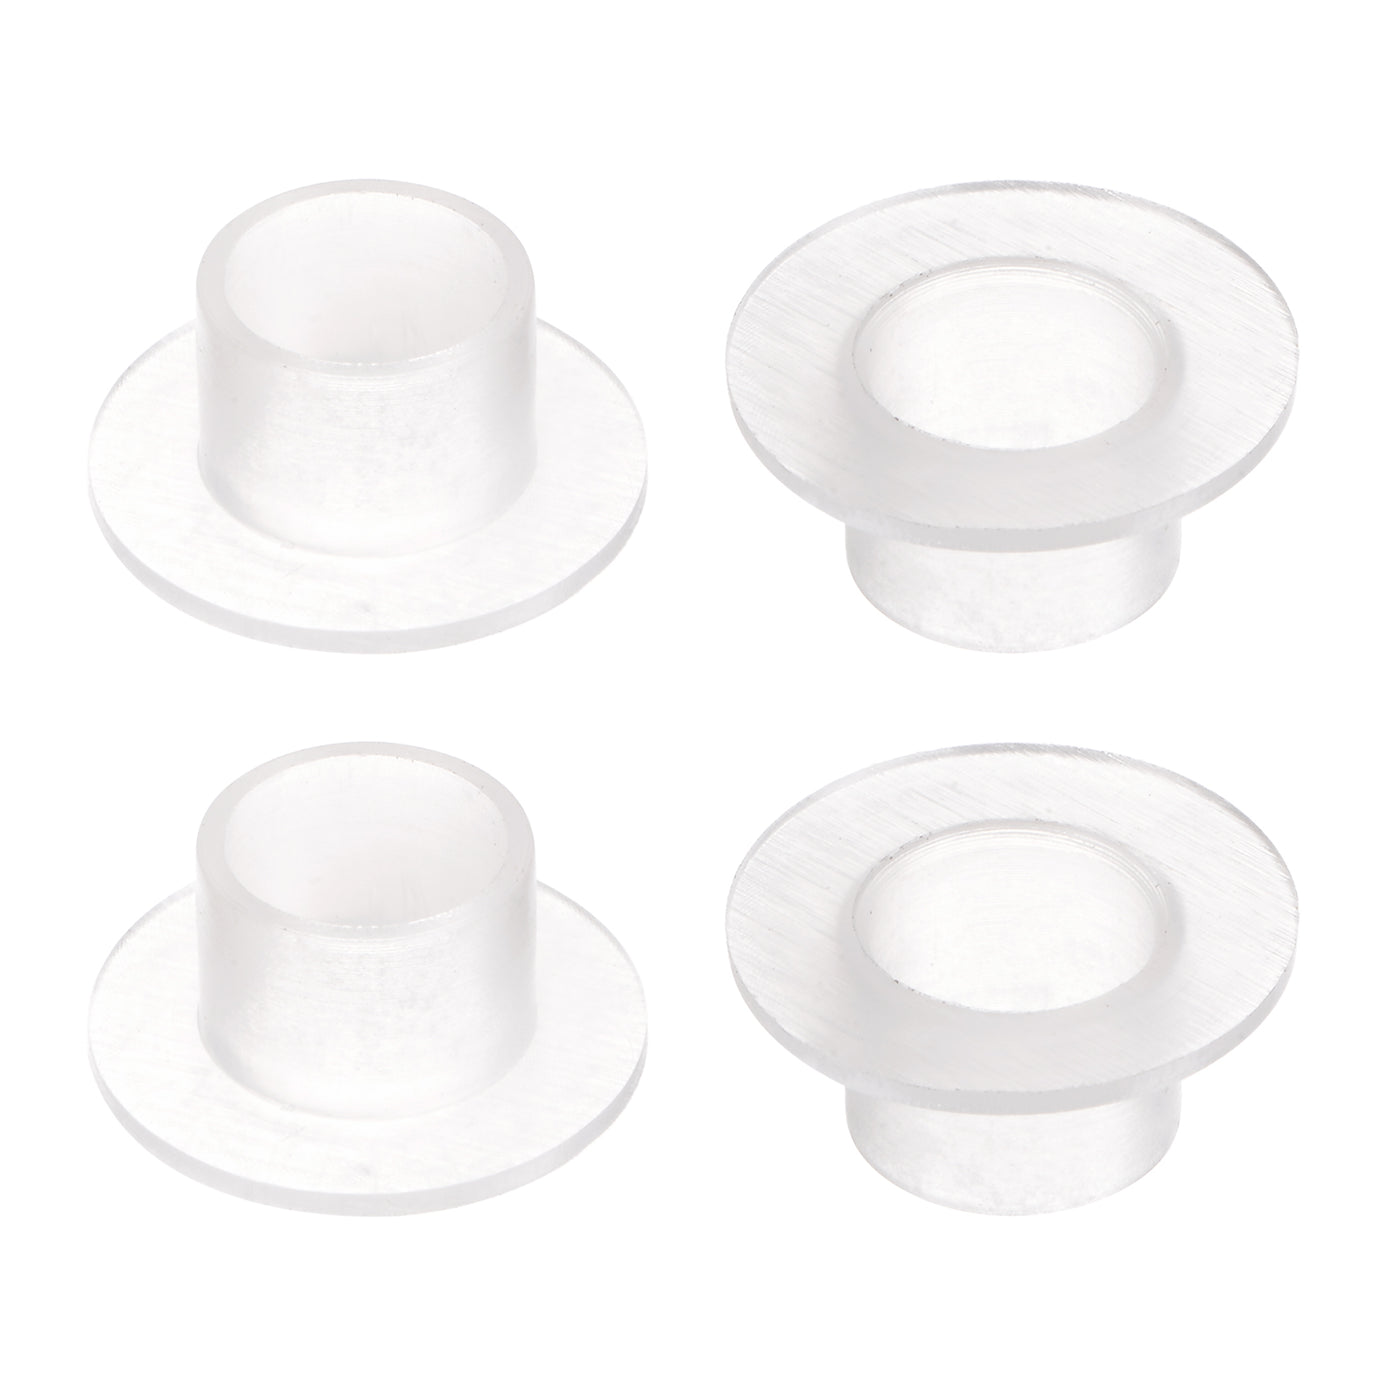 uxcell Uxcell 4pcs Flanged Sleeve Bearings 10.05mm ID 12.02mm OD 9.1mm L, Nylon Bushing White